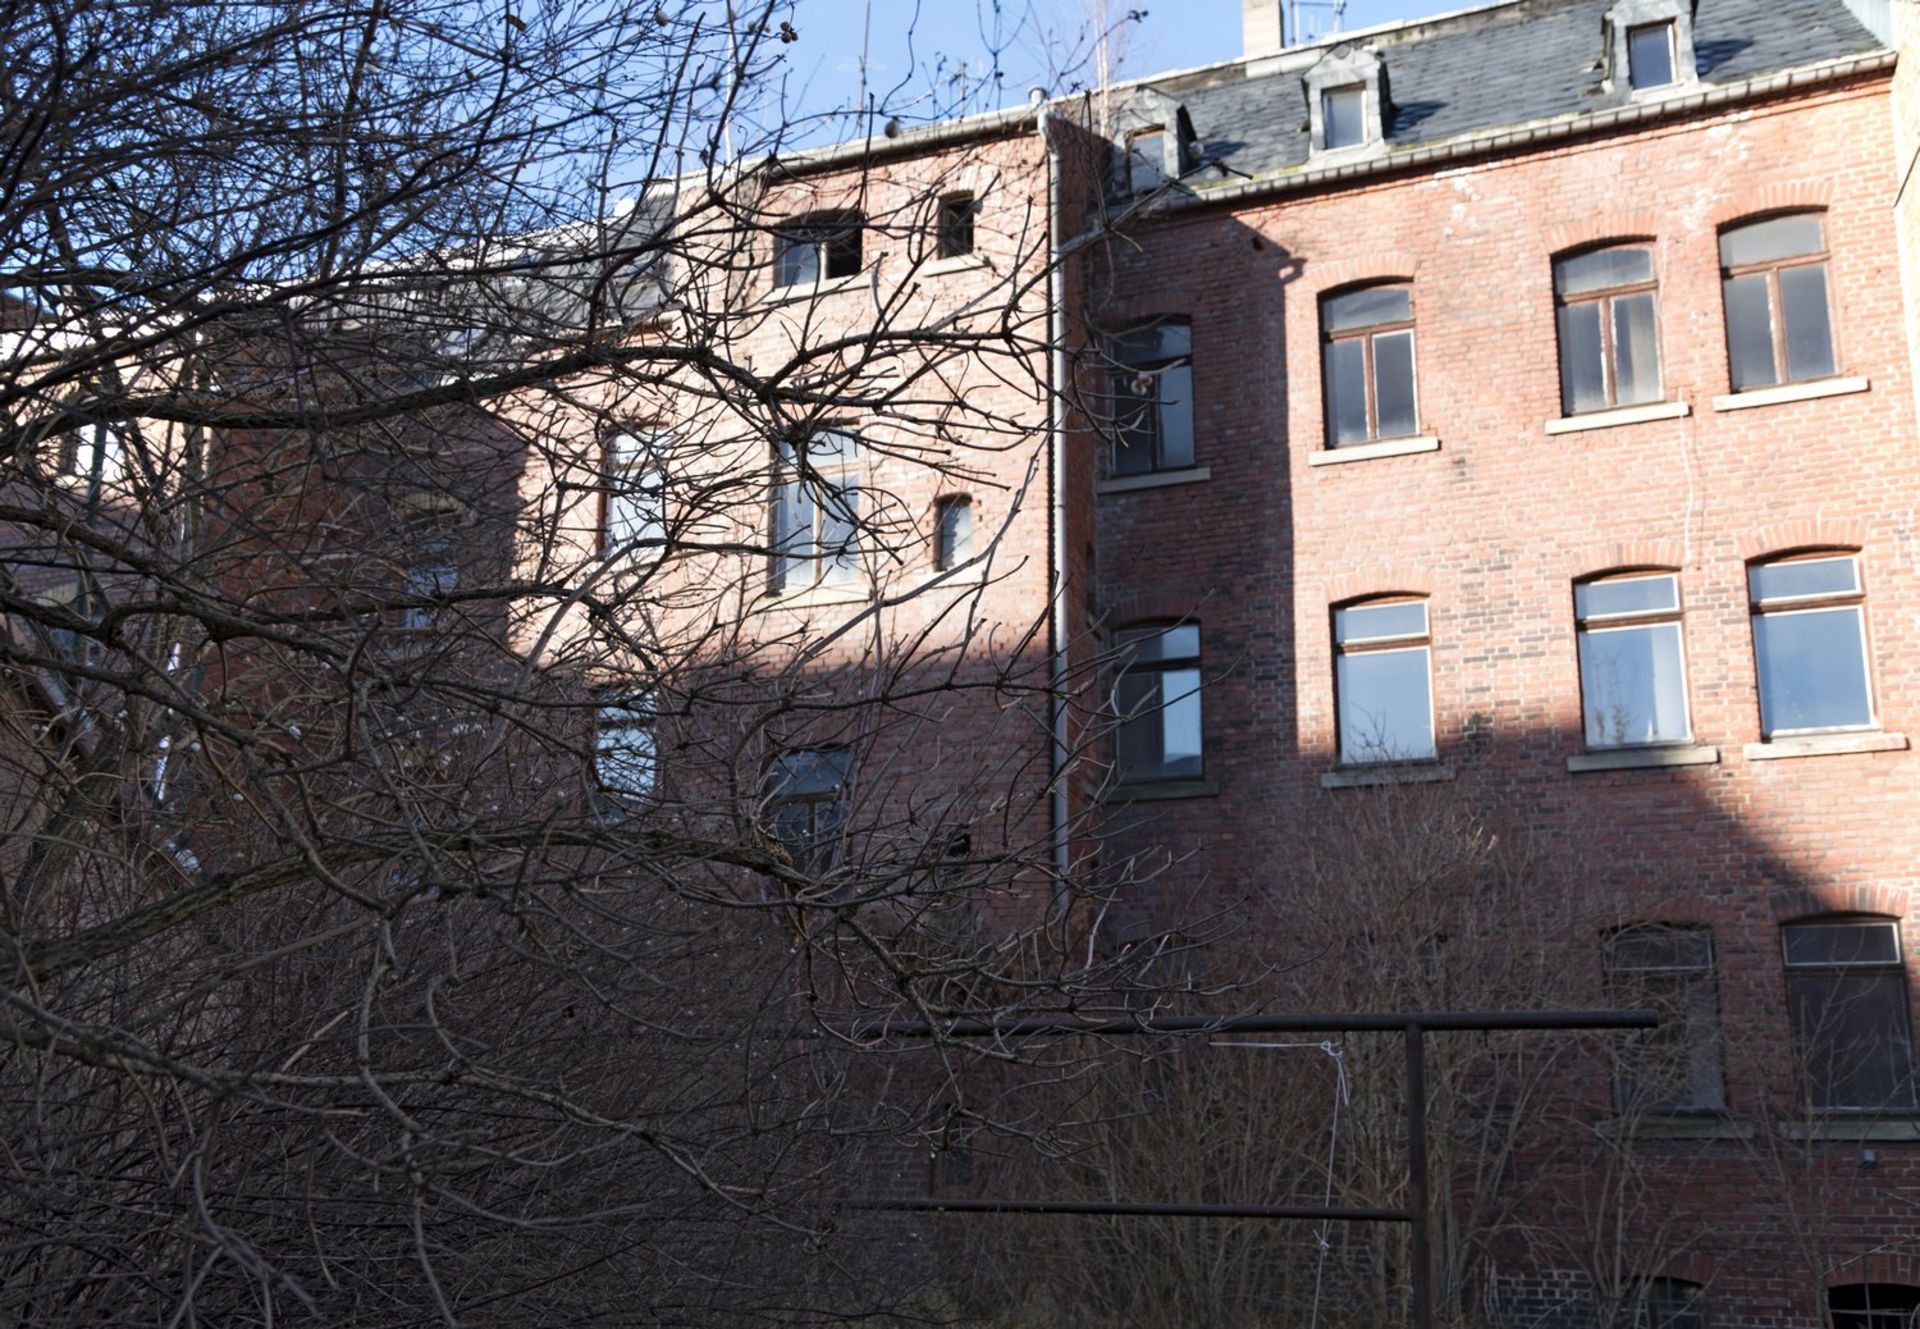 4 STOREY GERMANY APARTMENT BLOCK IN ADDITION TO A FULL BASEMENT + HUGE ATTIC! - Image 11 of 76